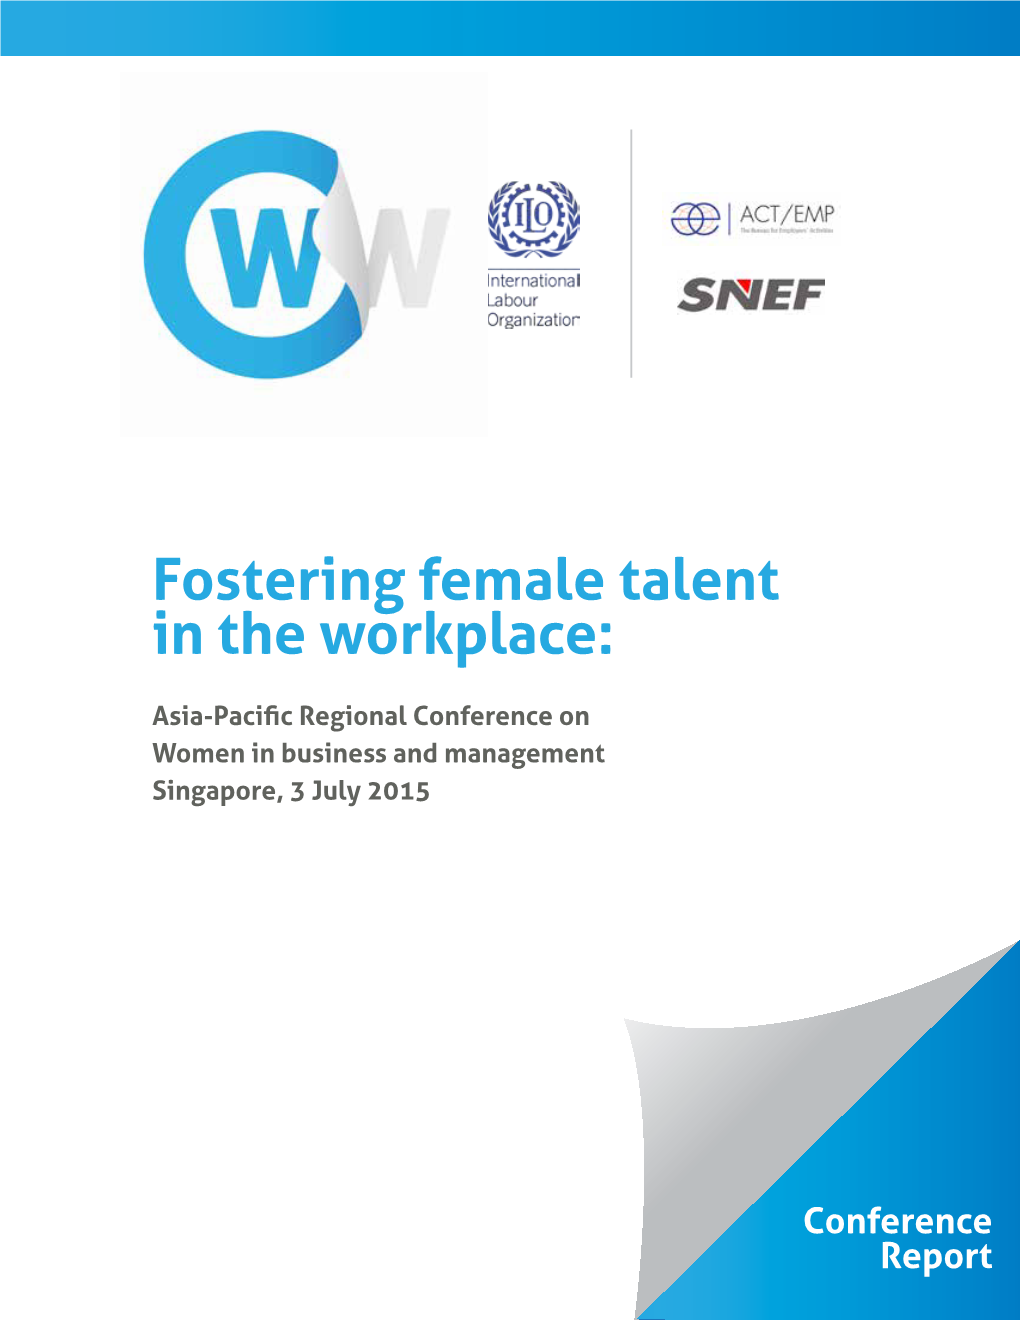 Fostering Female Talent in the Workplace